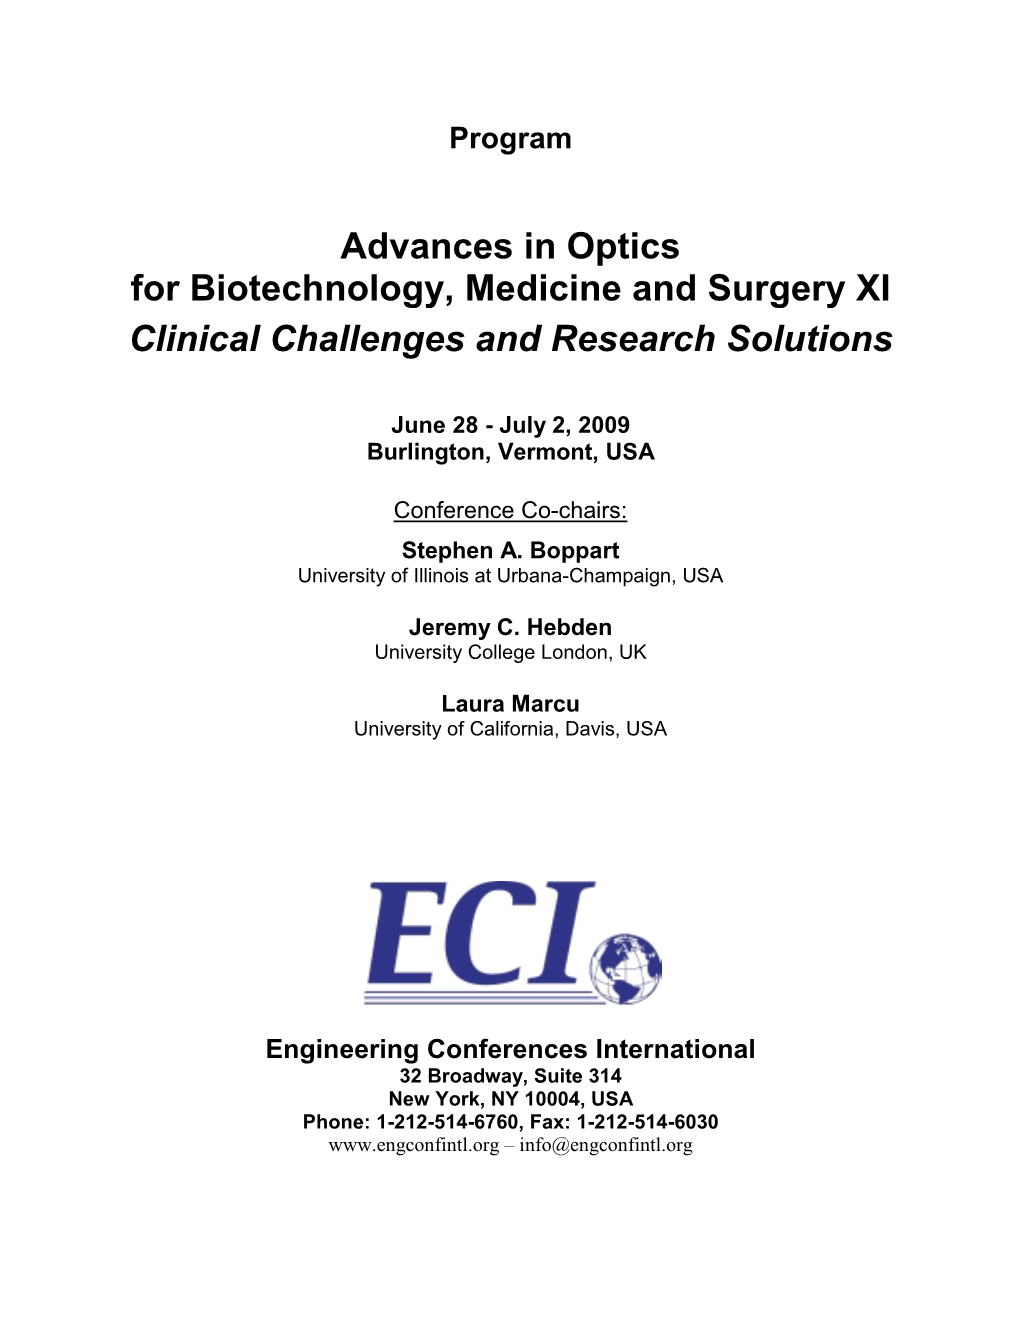 Advances in Optics for Biotechnology, Medicine and Surgery XI Clinical Challenges and Research Solutions